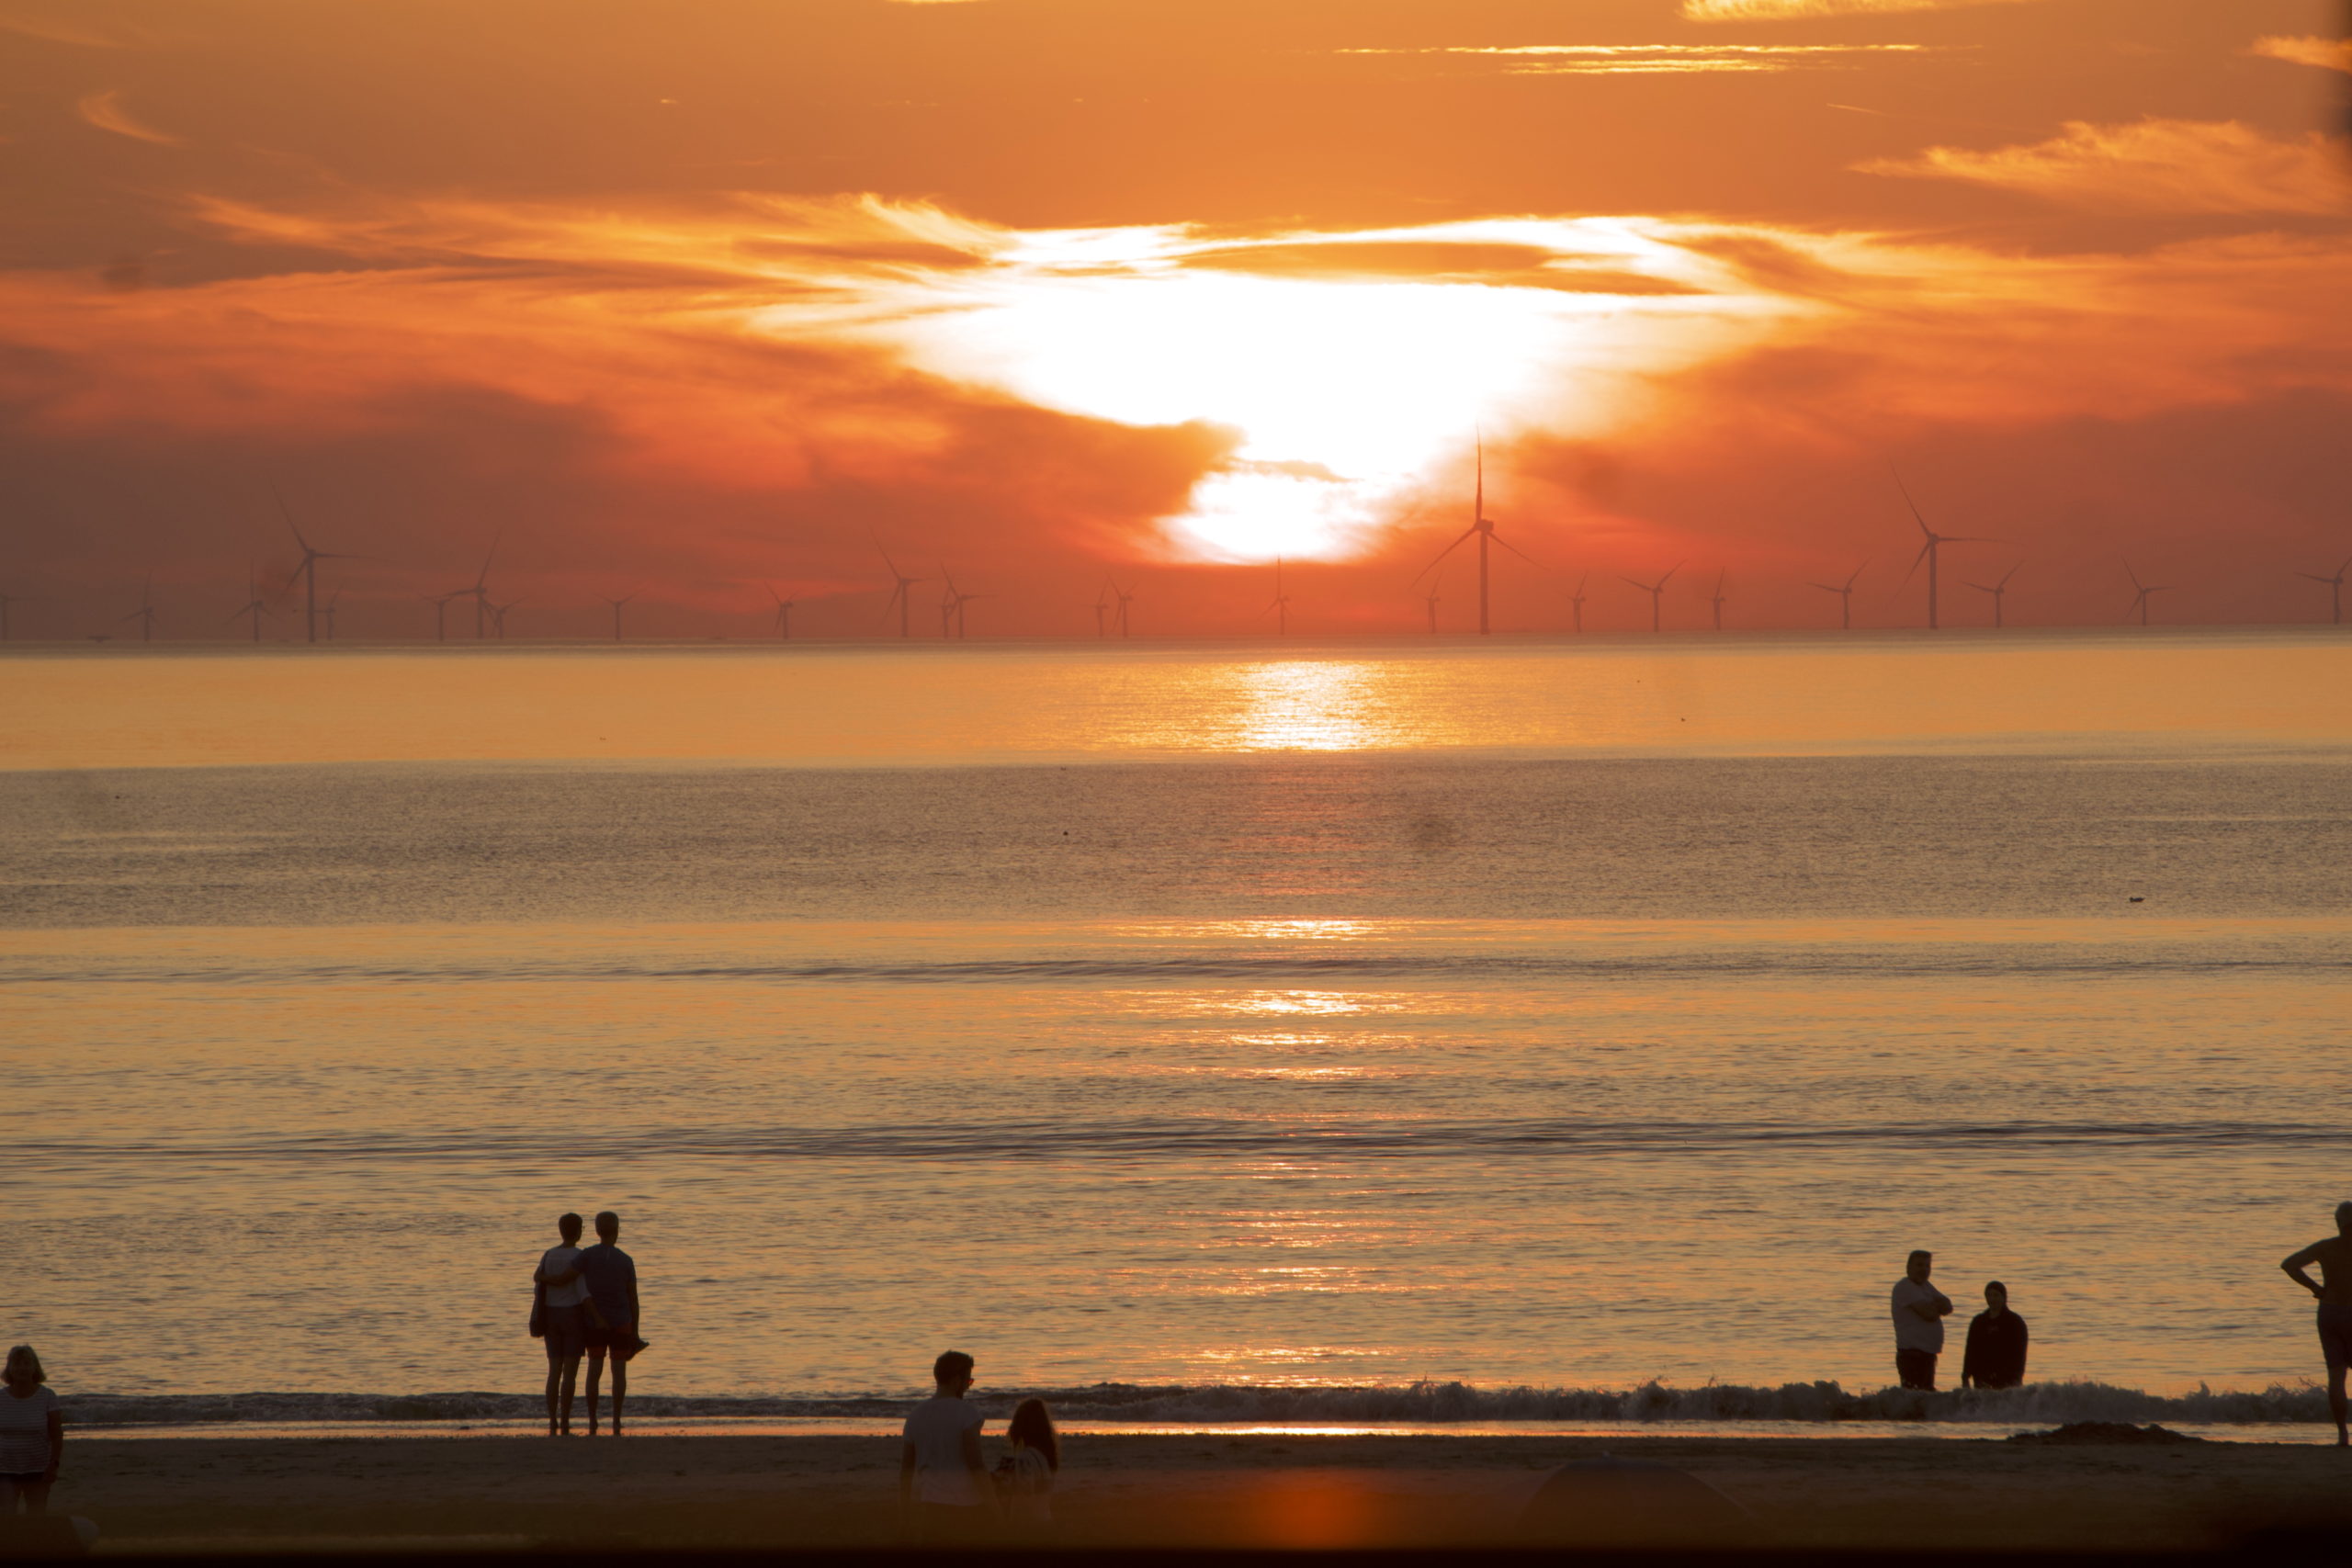 A view of the sunset in Zaanvoort aan zee , one of the closest beaches to Amsterdam,with some people walking on the sea side.